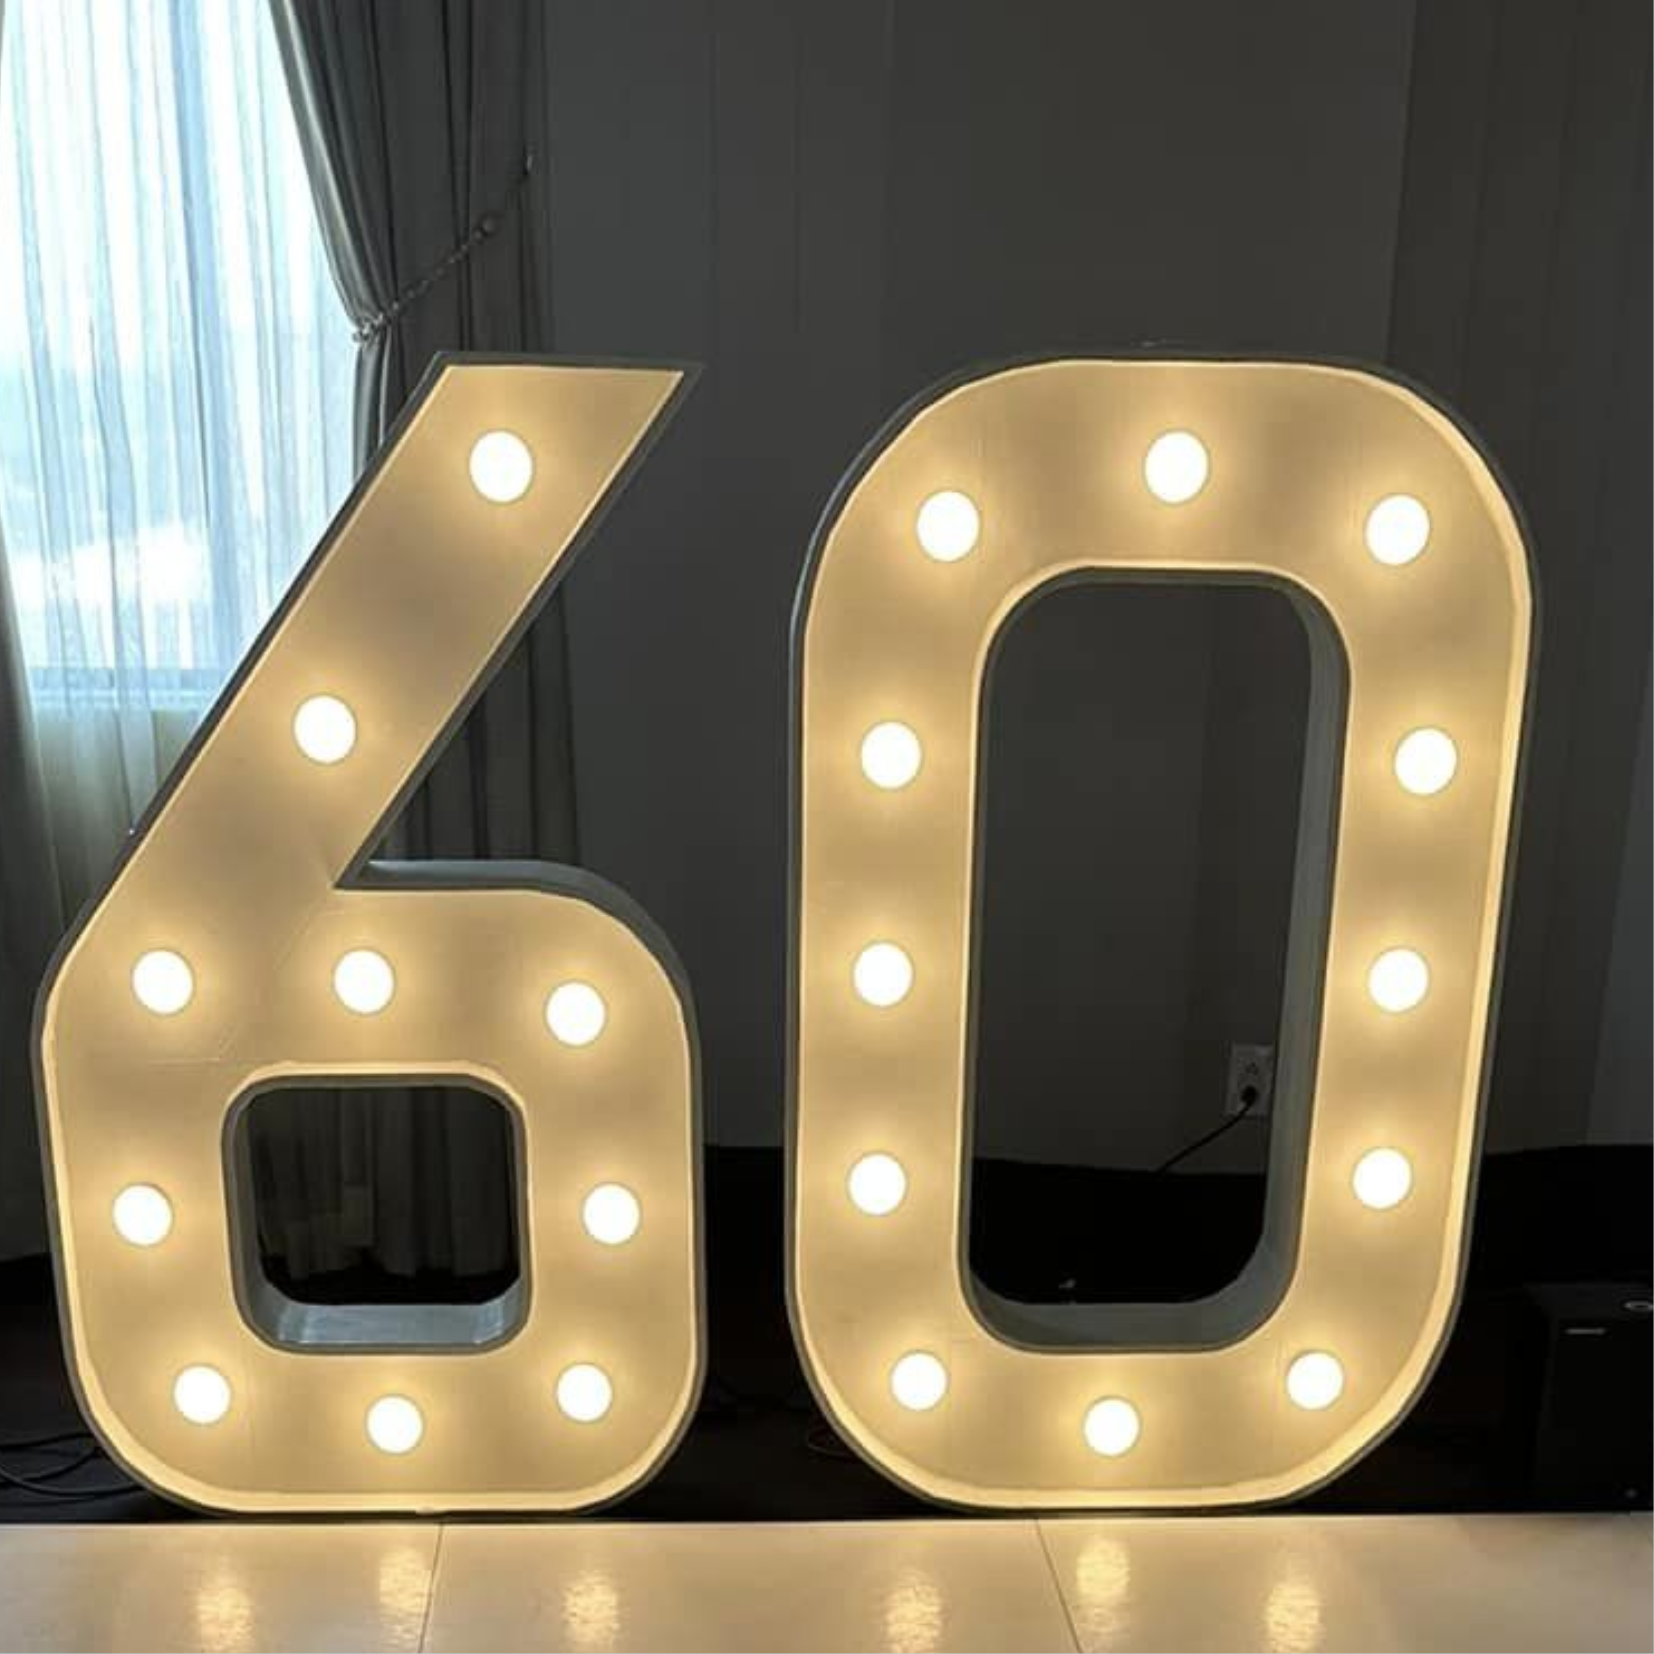 RENTAL Light Up Numbers